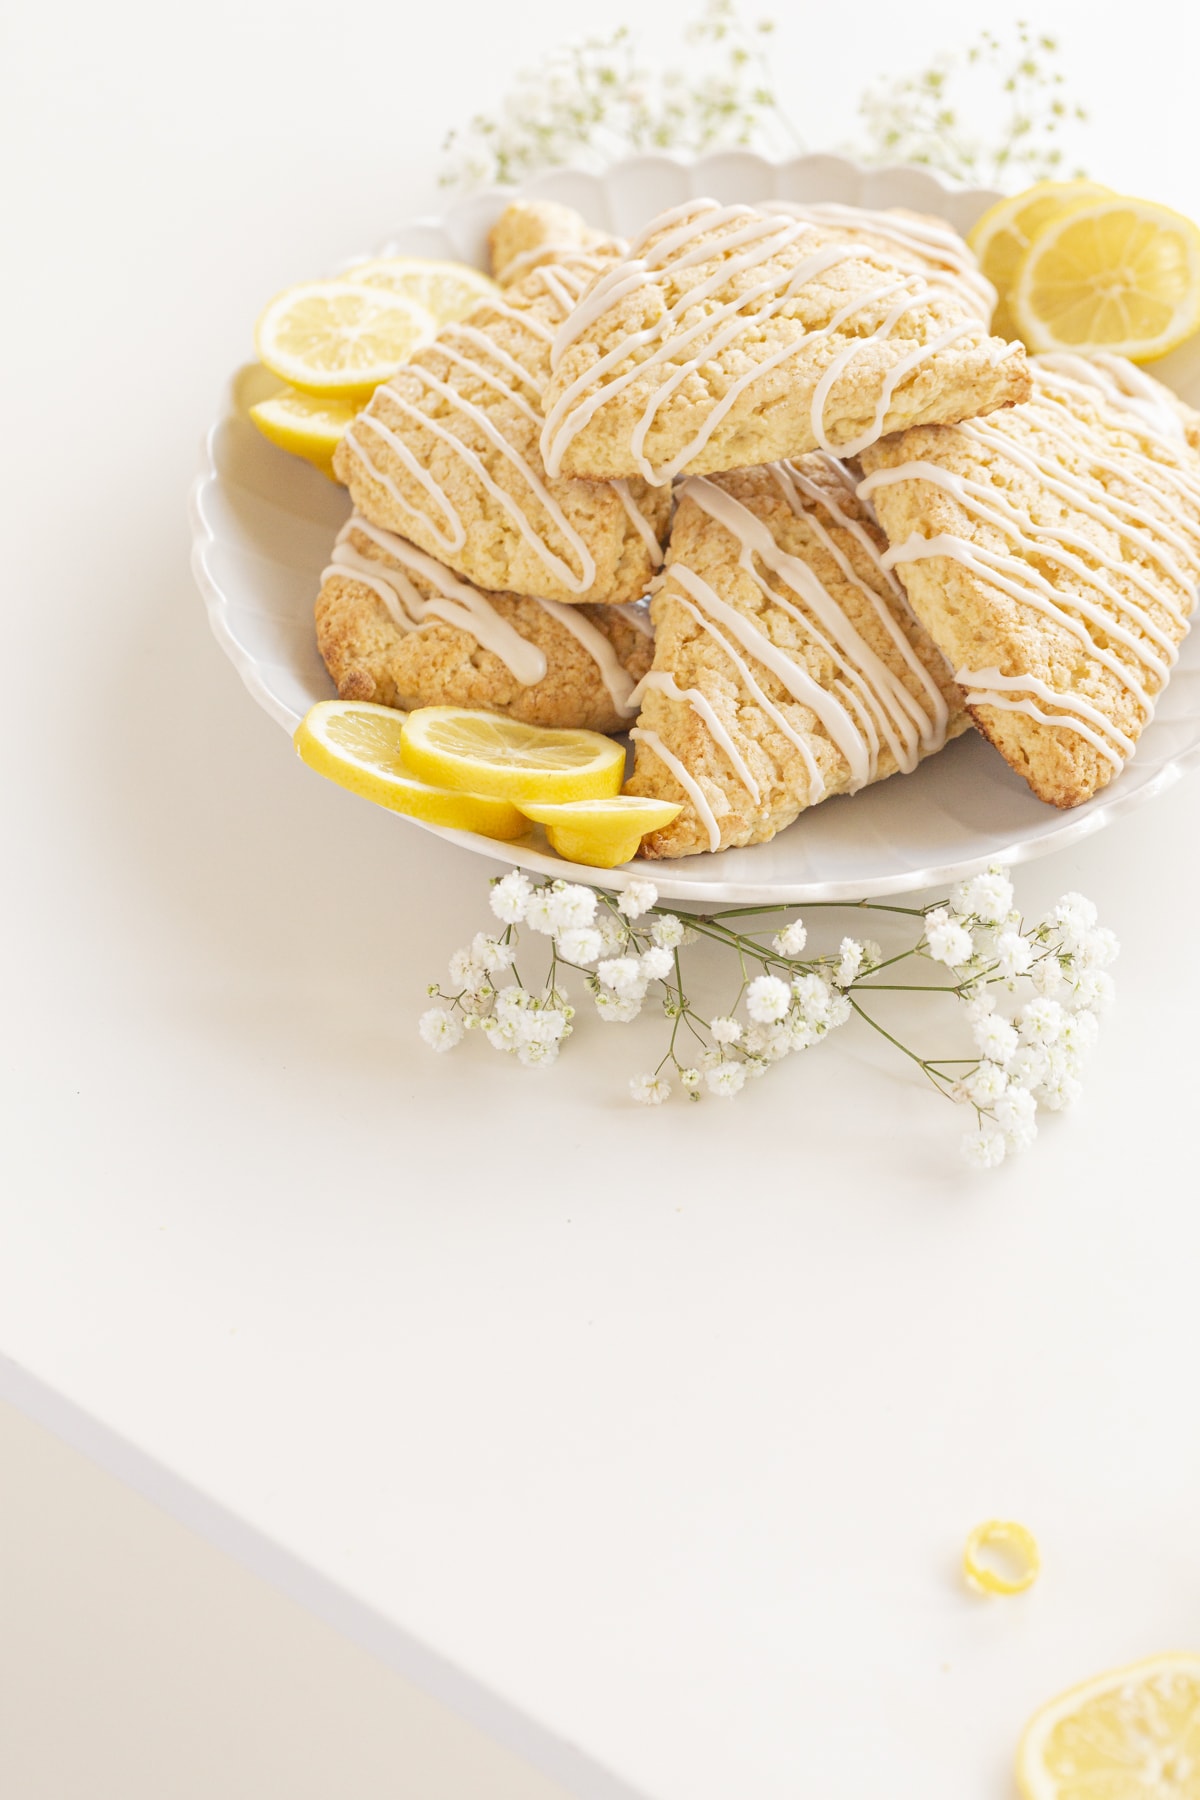 lemon scones on a plate with lemons and flowers